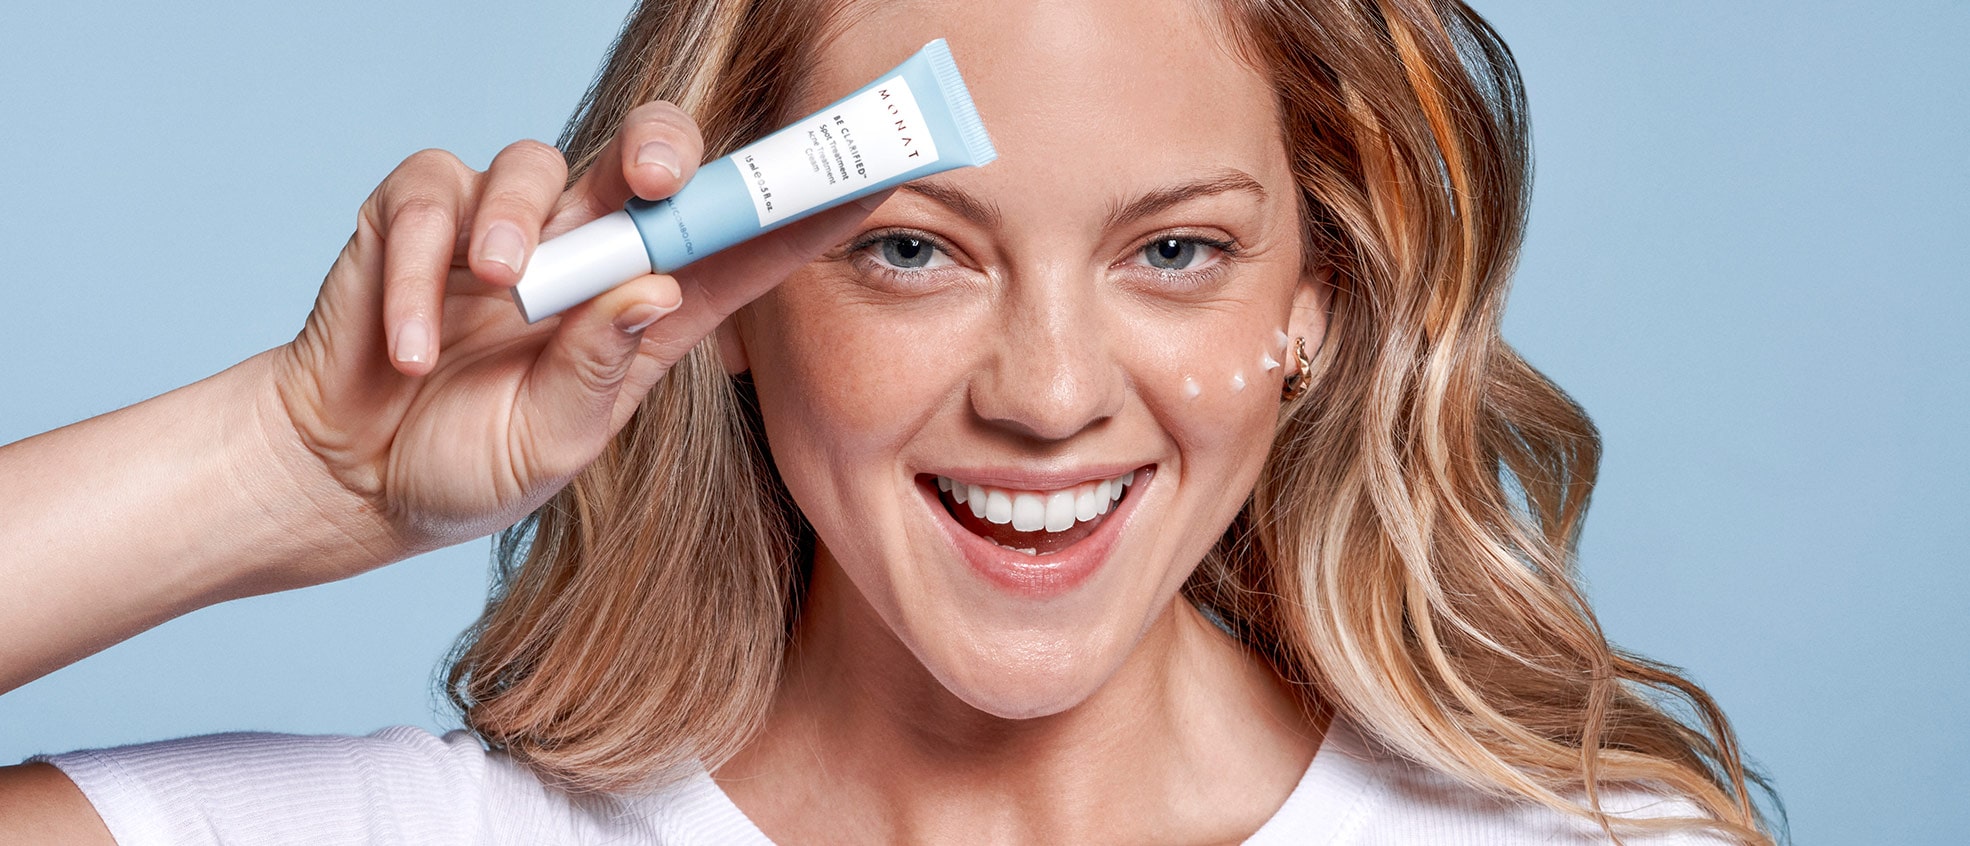 A blonde female smiling and holding BE CLARIFIED™ Spot Treatment infront of her face, while having a few drops of the treatment on her cheek.